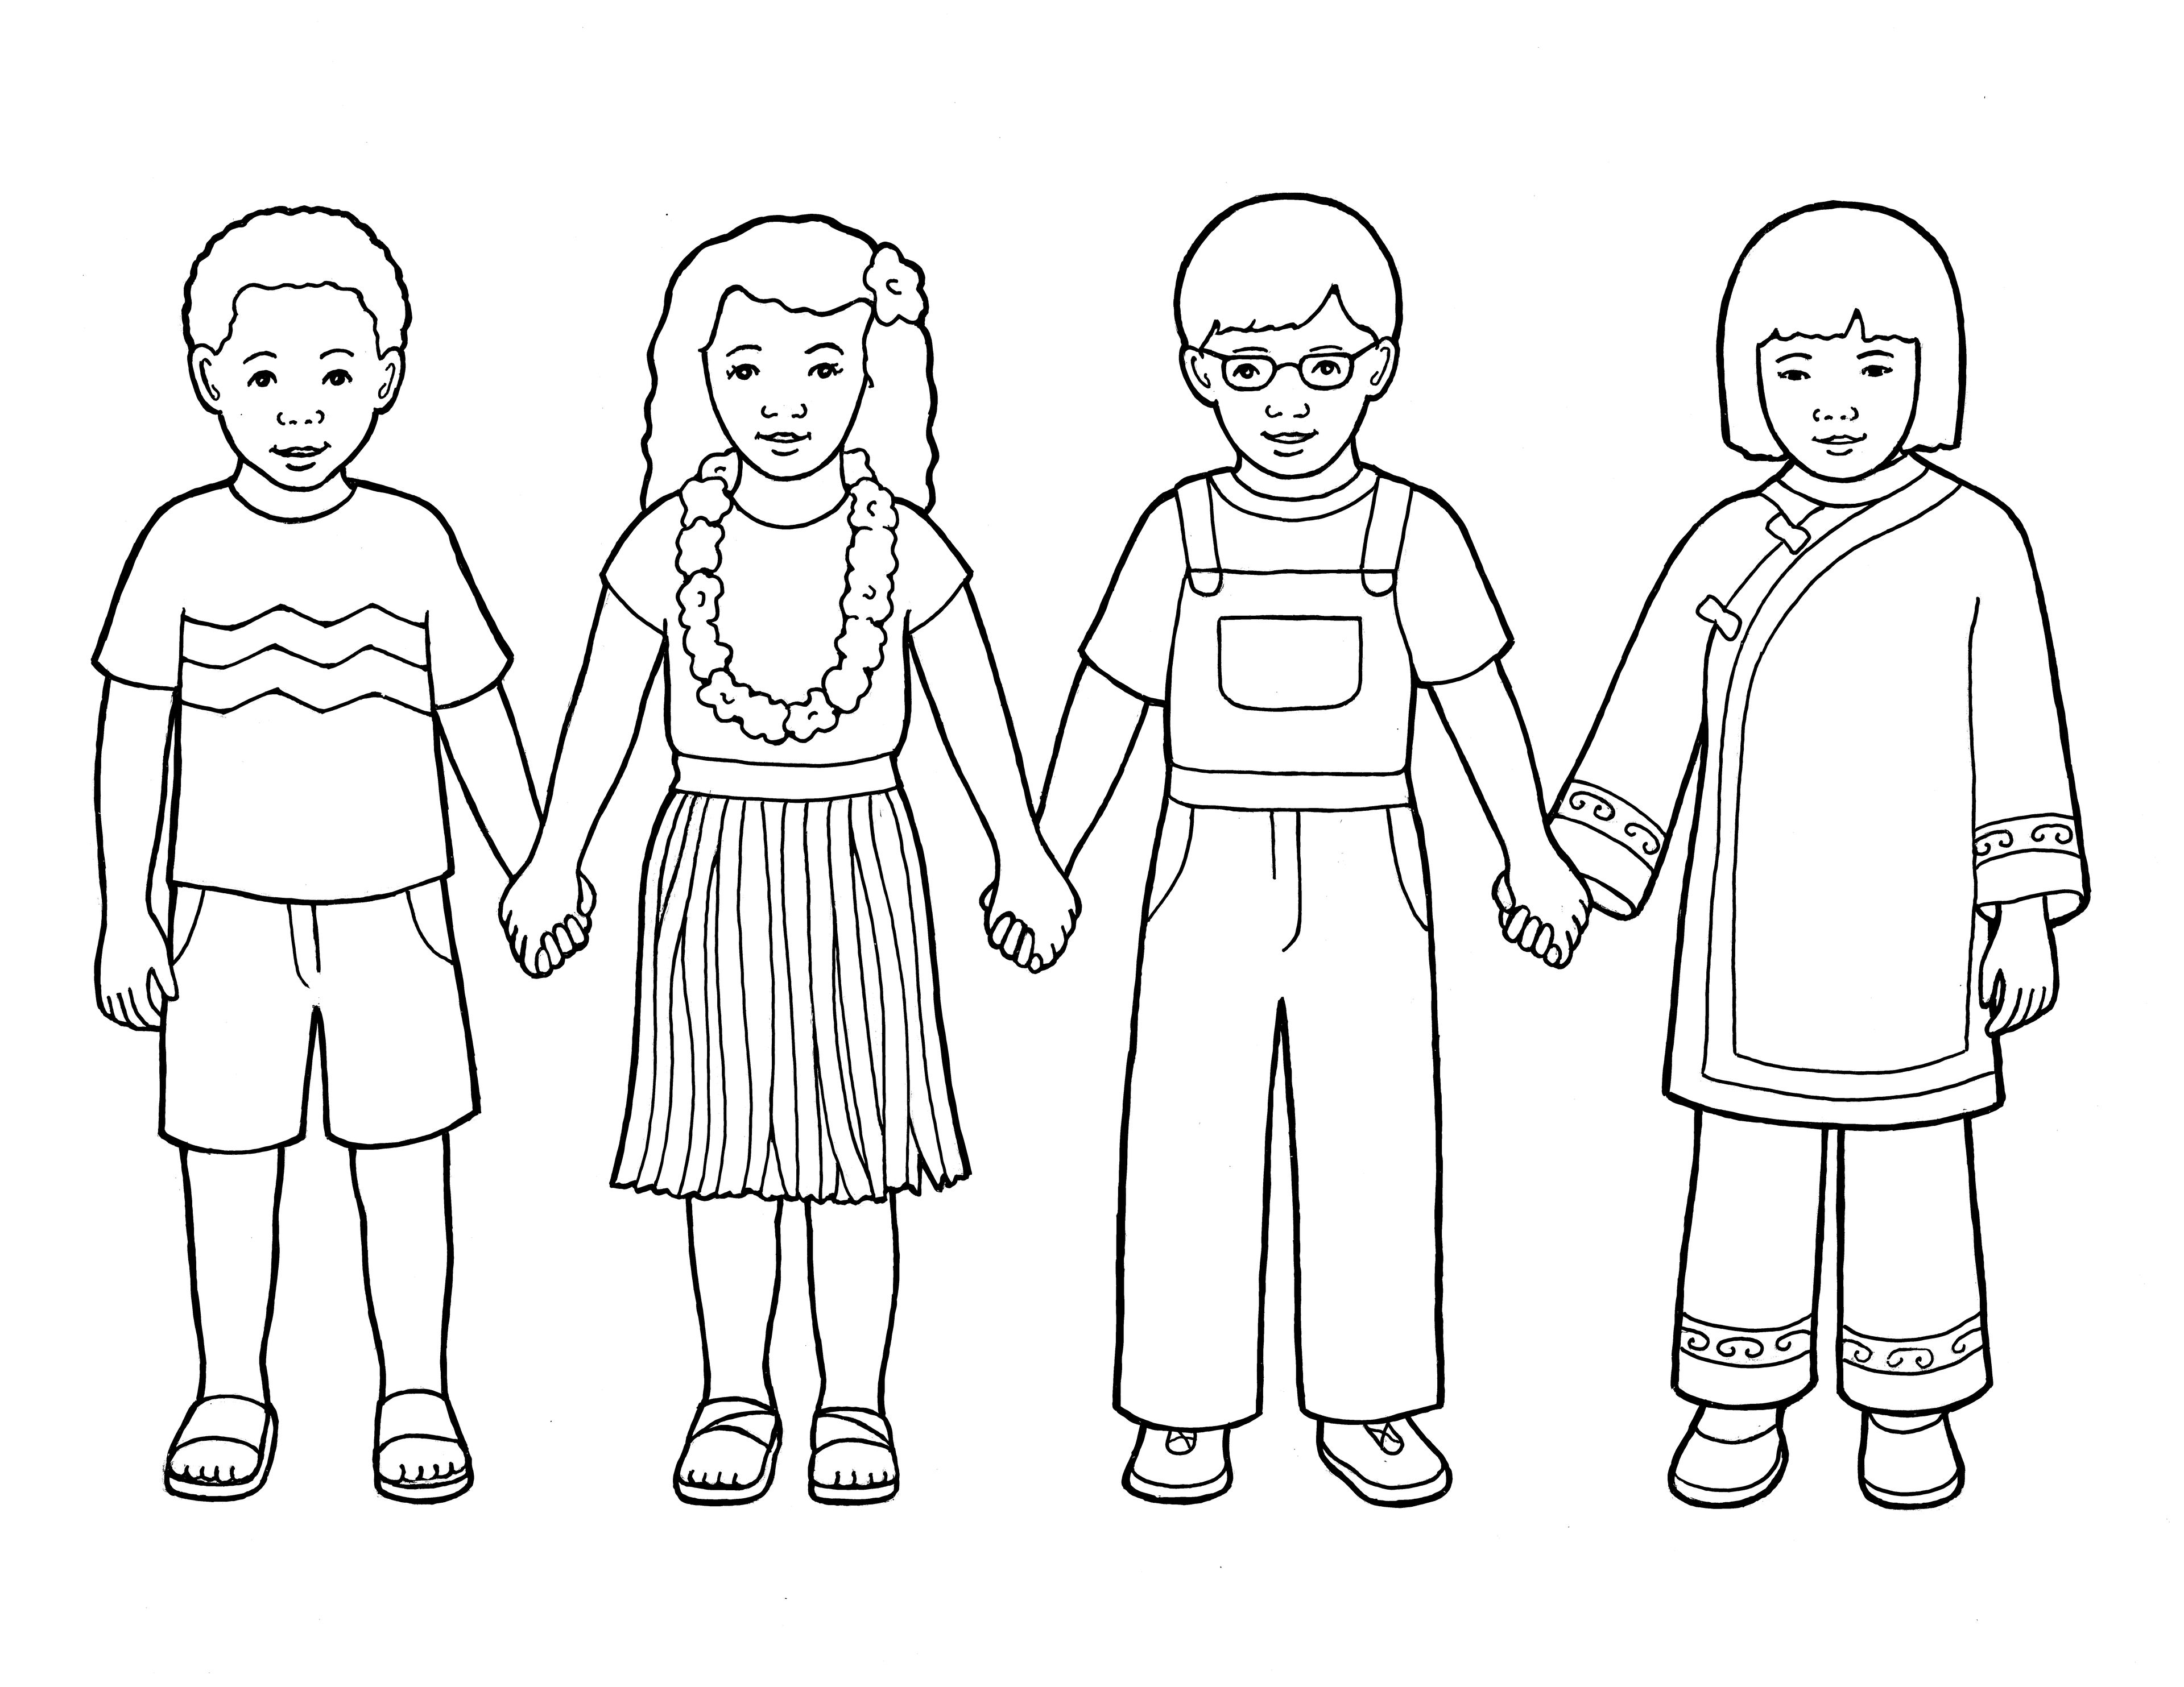 A line drawing showing four children from around the world holding hands.